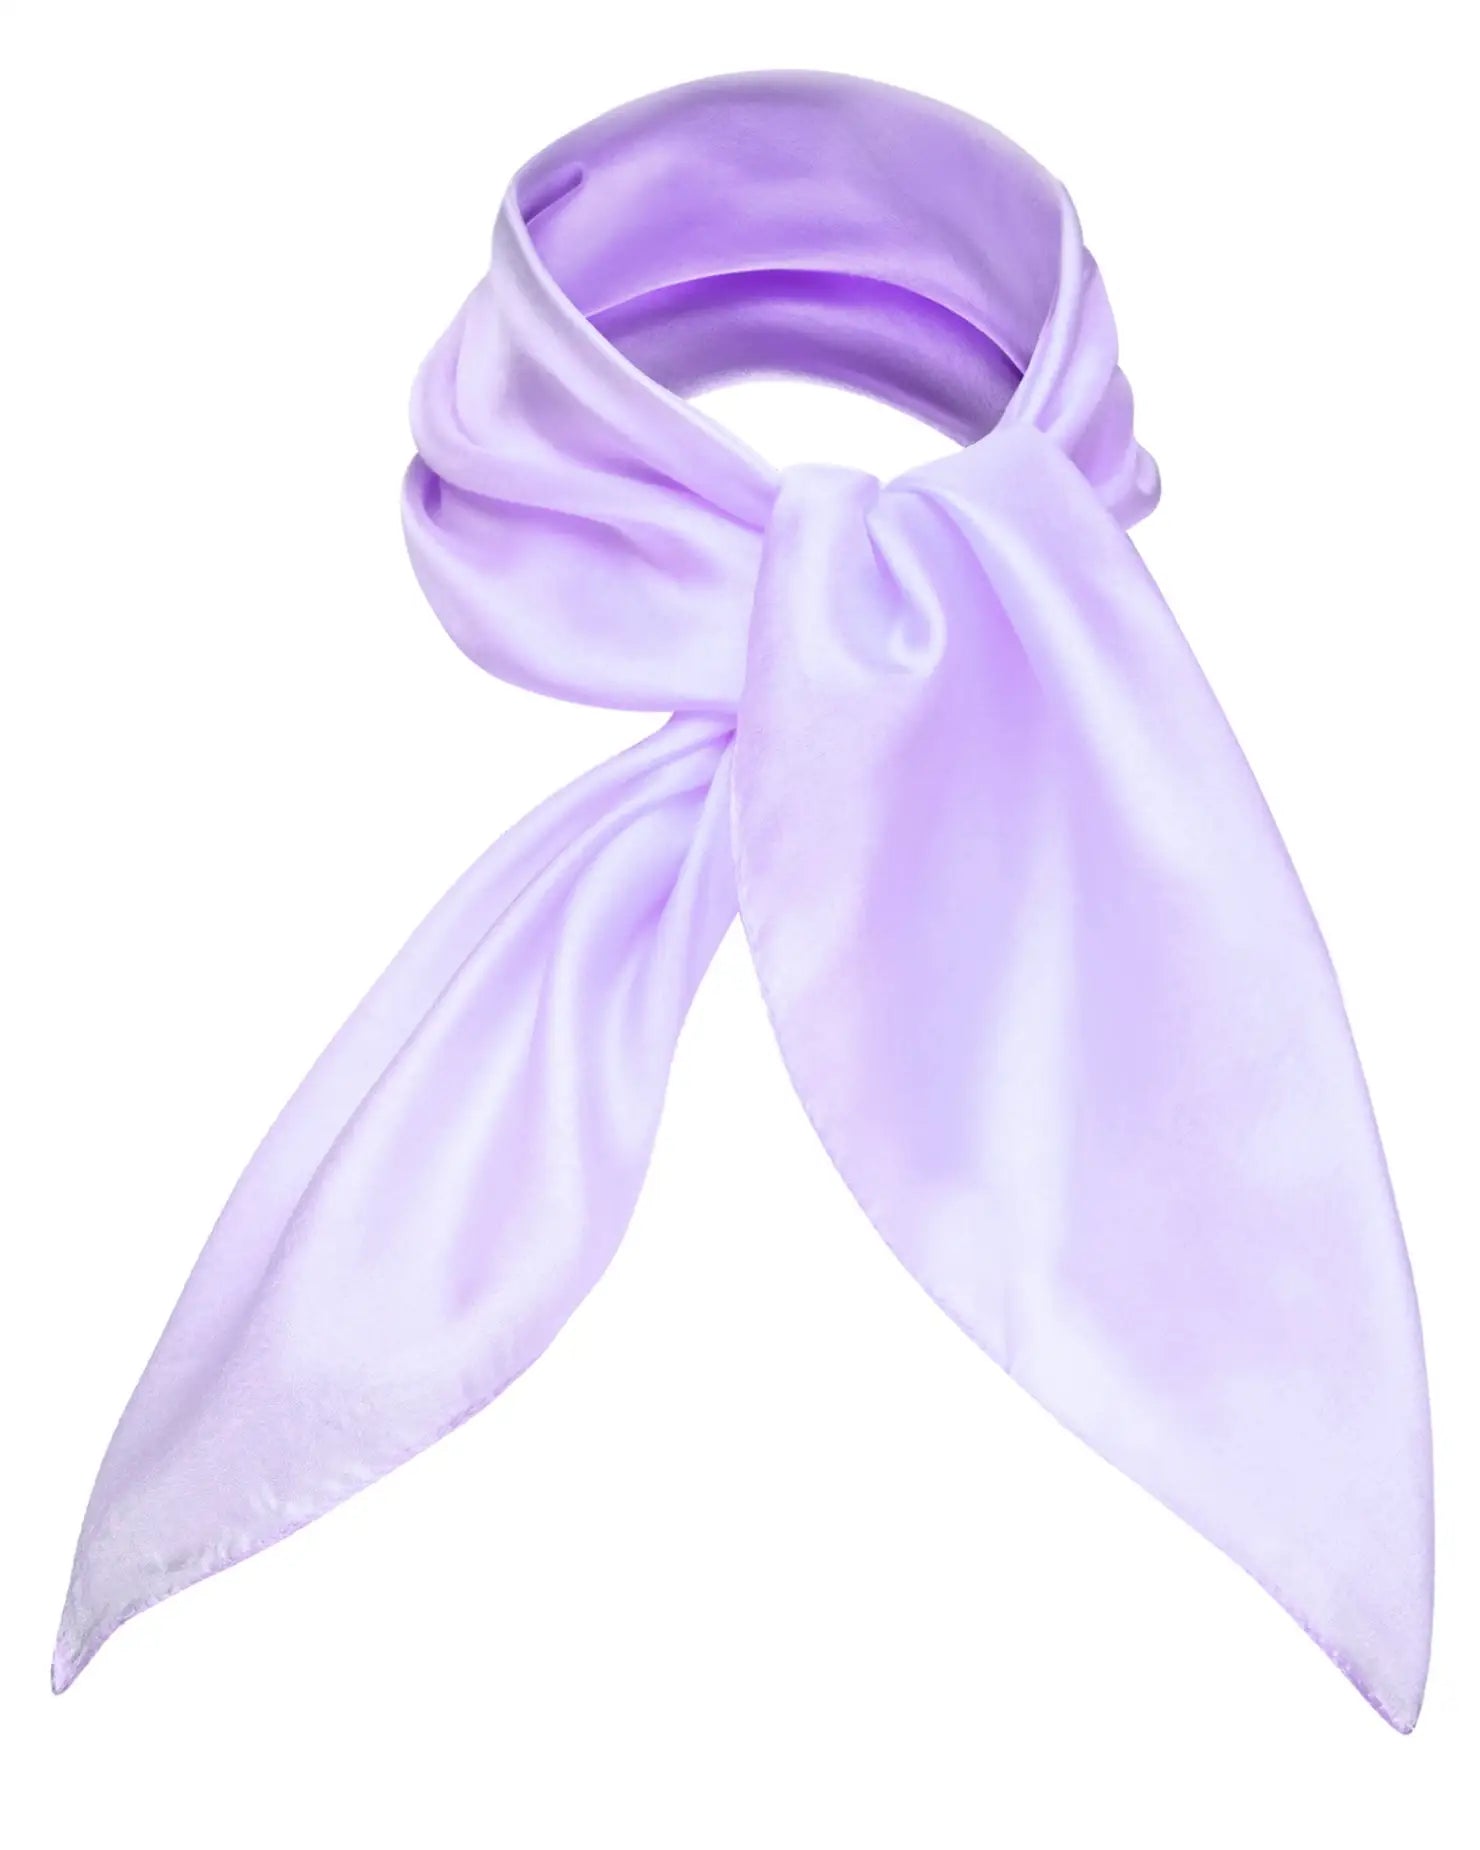 Luxurious Mulberry Silk Small Square Scarf in White with Purple Satin